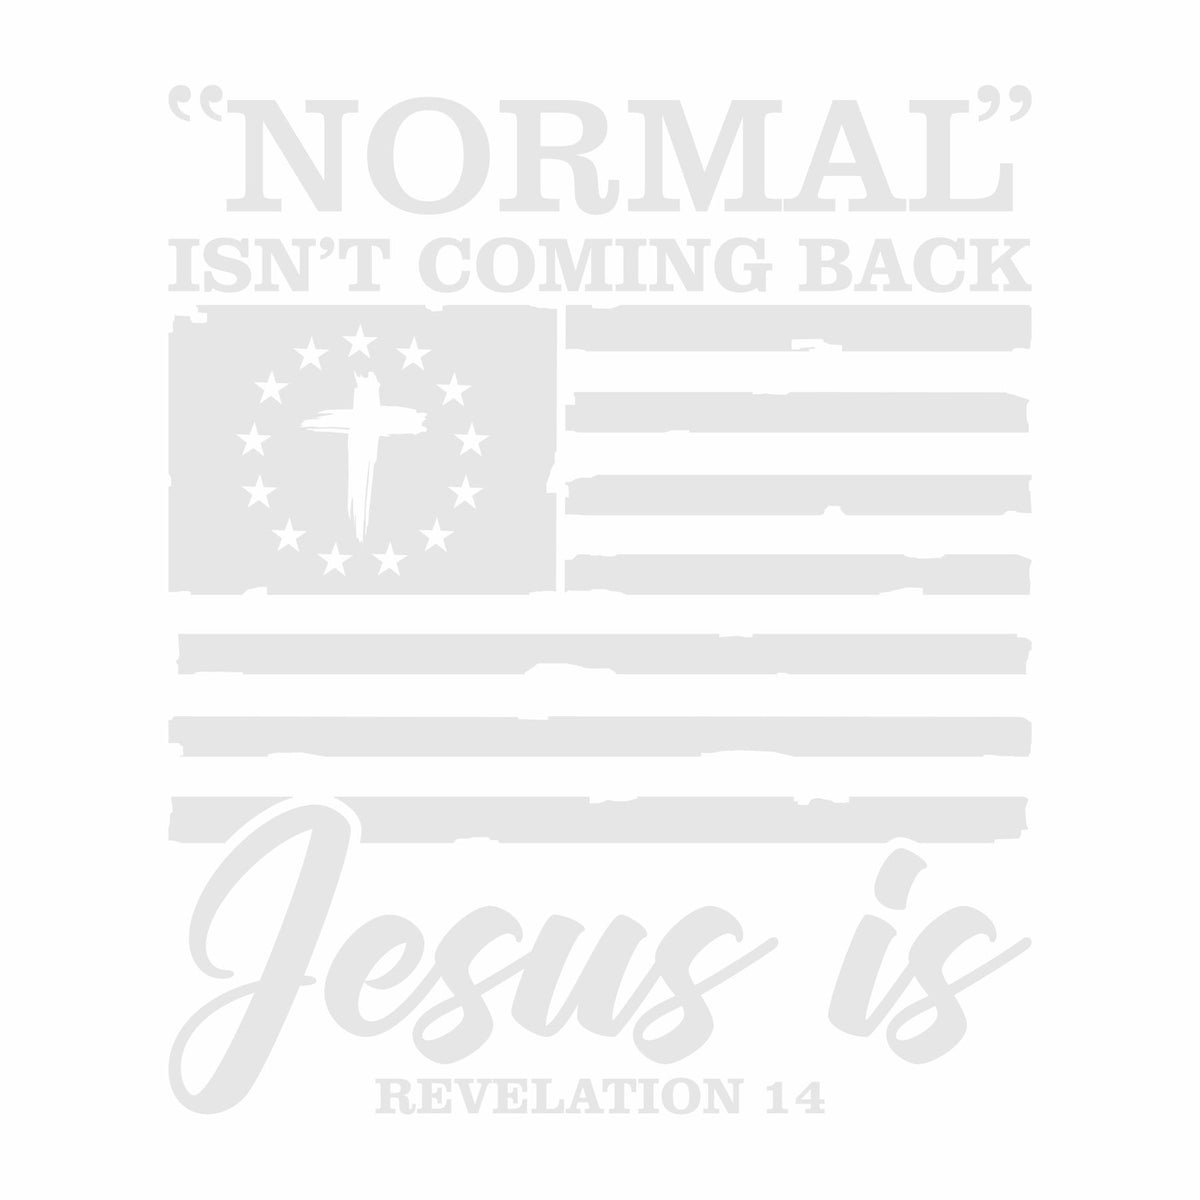 Normal Isn't Coming Back - PermaSticker - Free Shipping